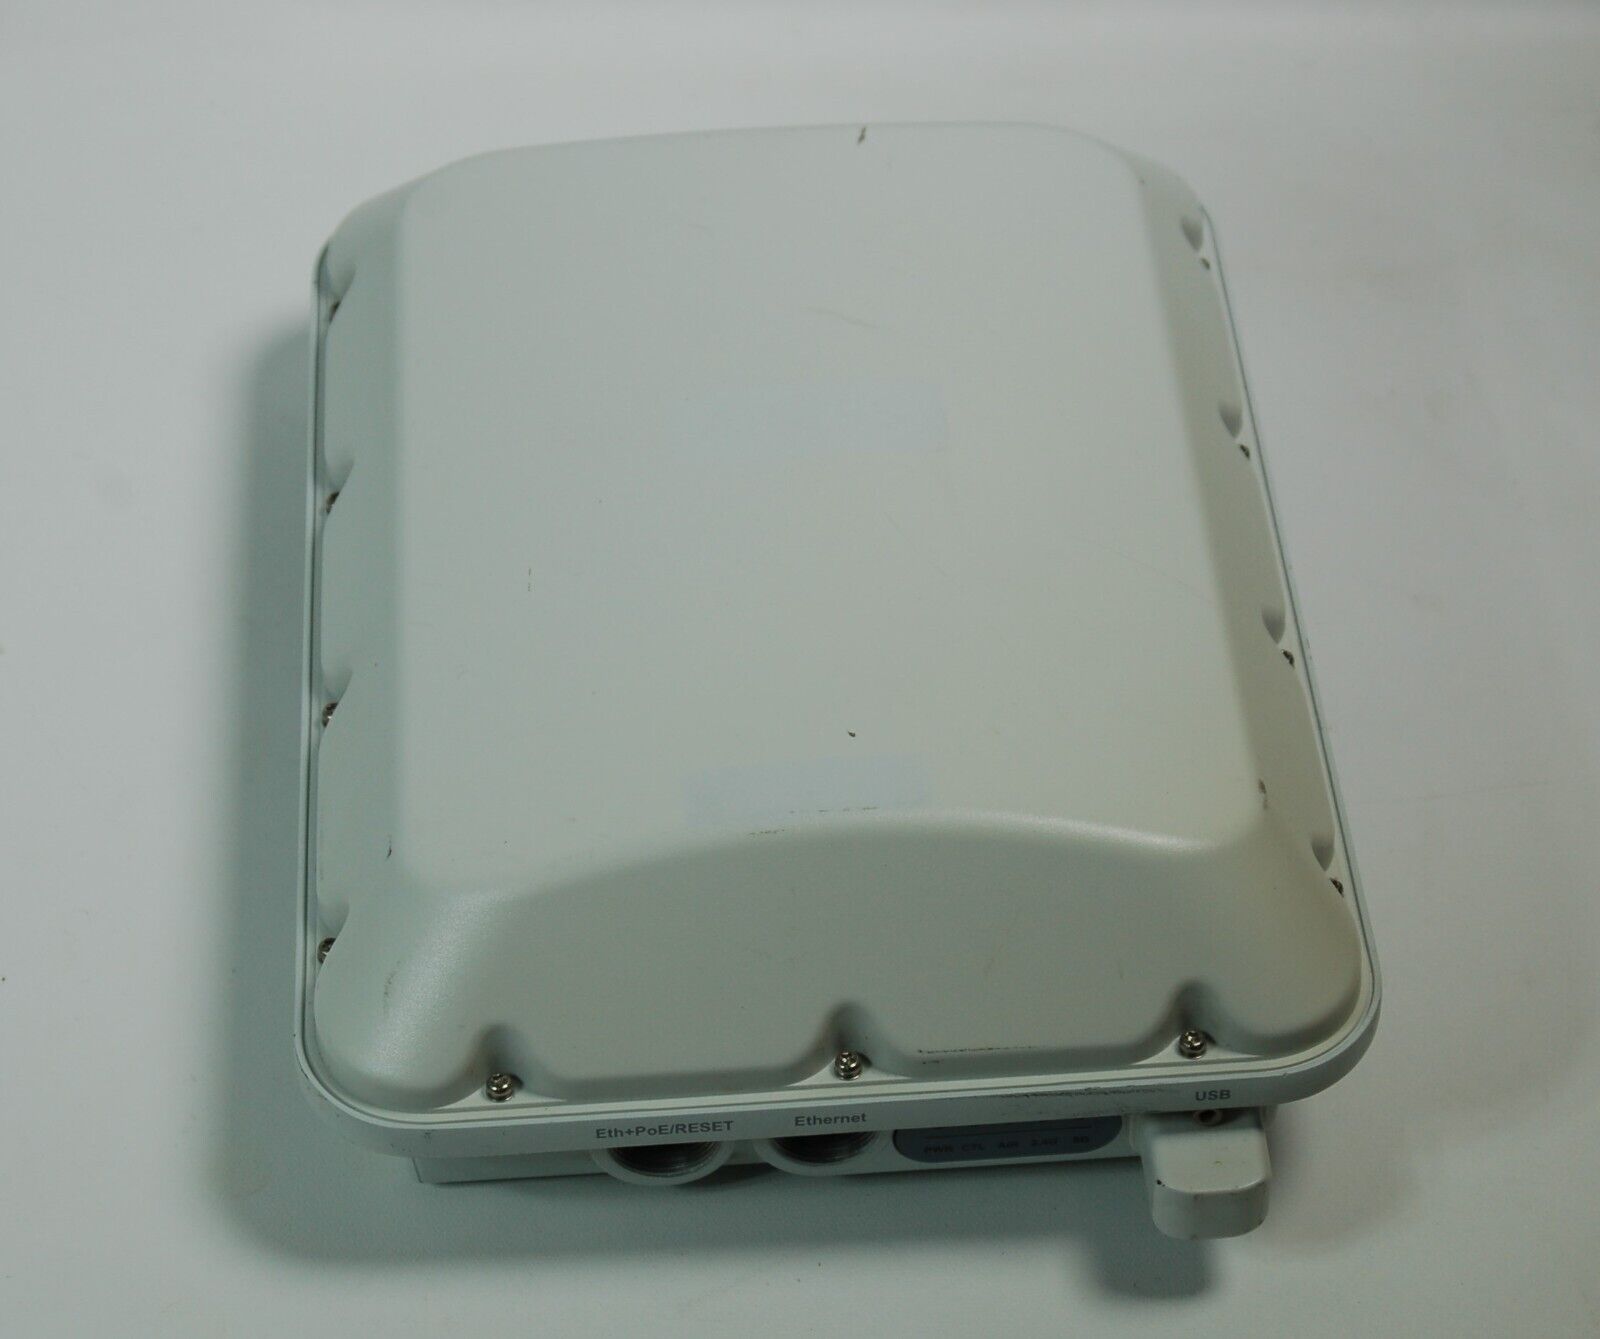 Ruckus Wireless ZoneFlex T610 Outdoor Access Point 901-T610-US01 Tested & Reset